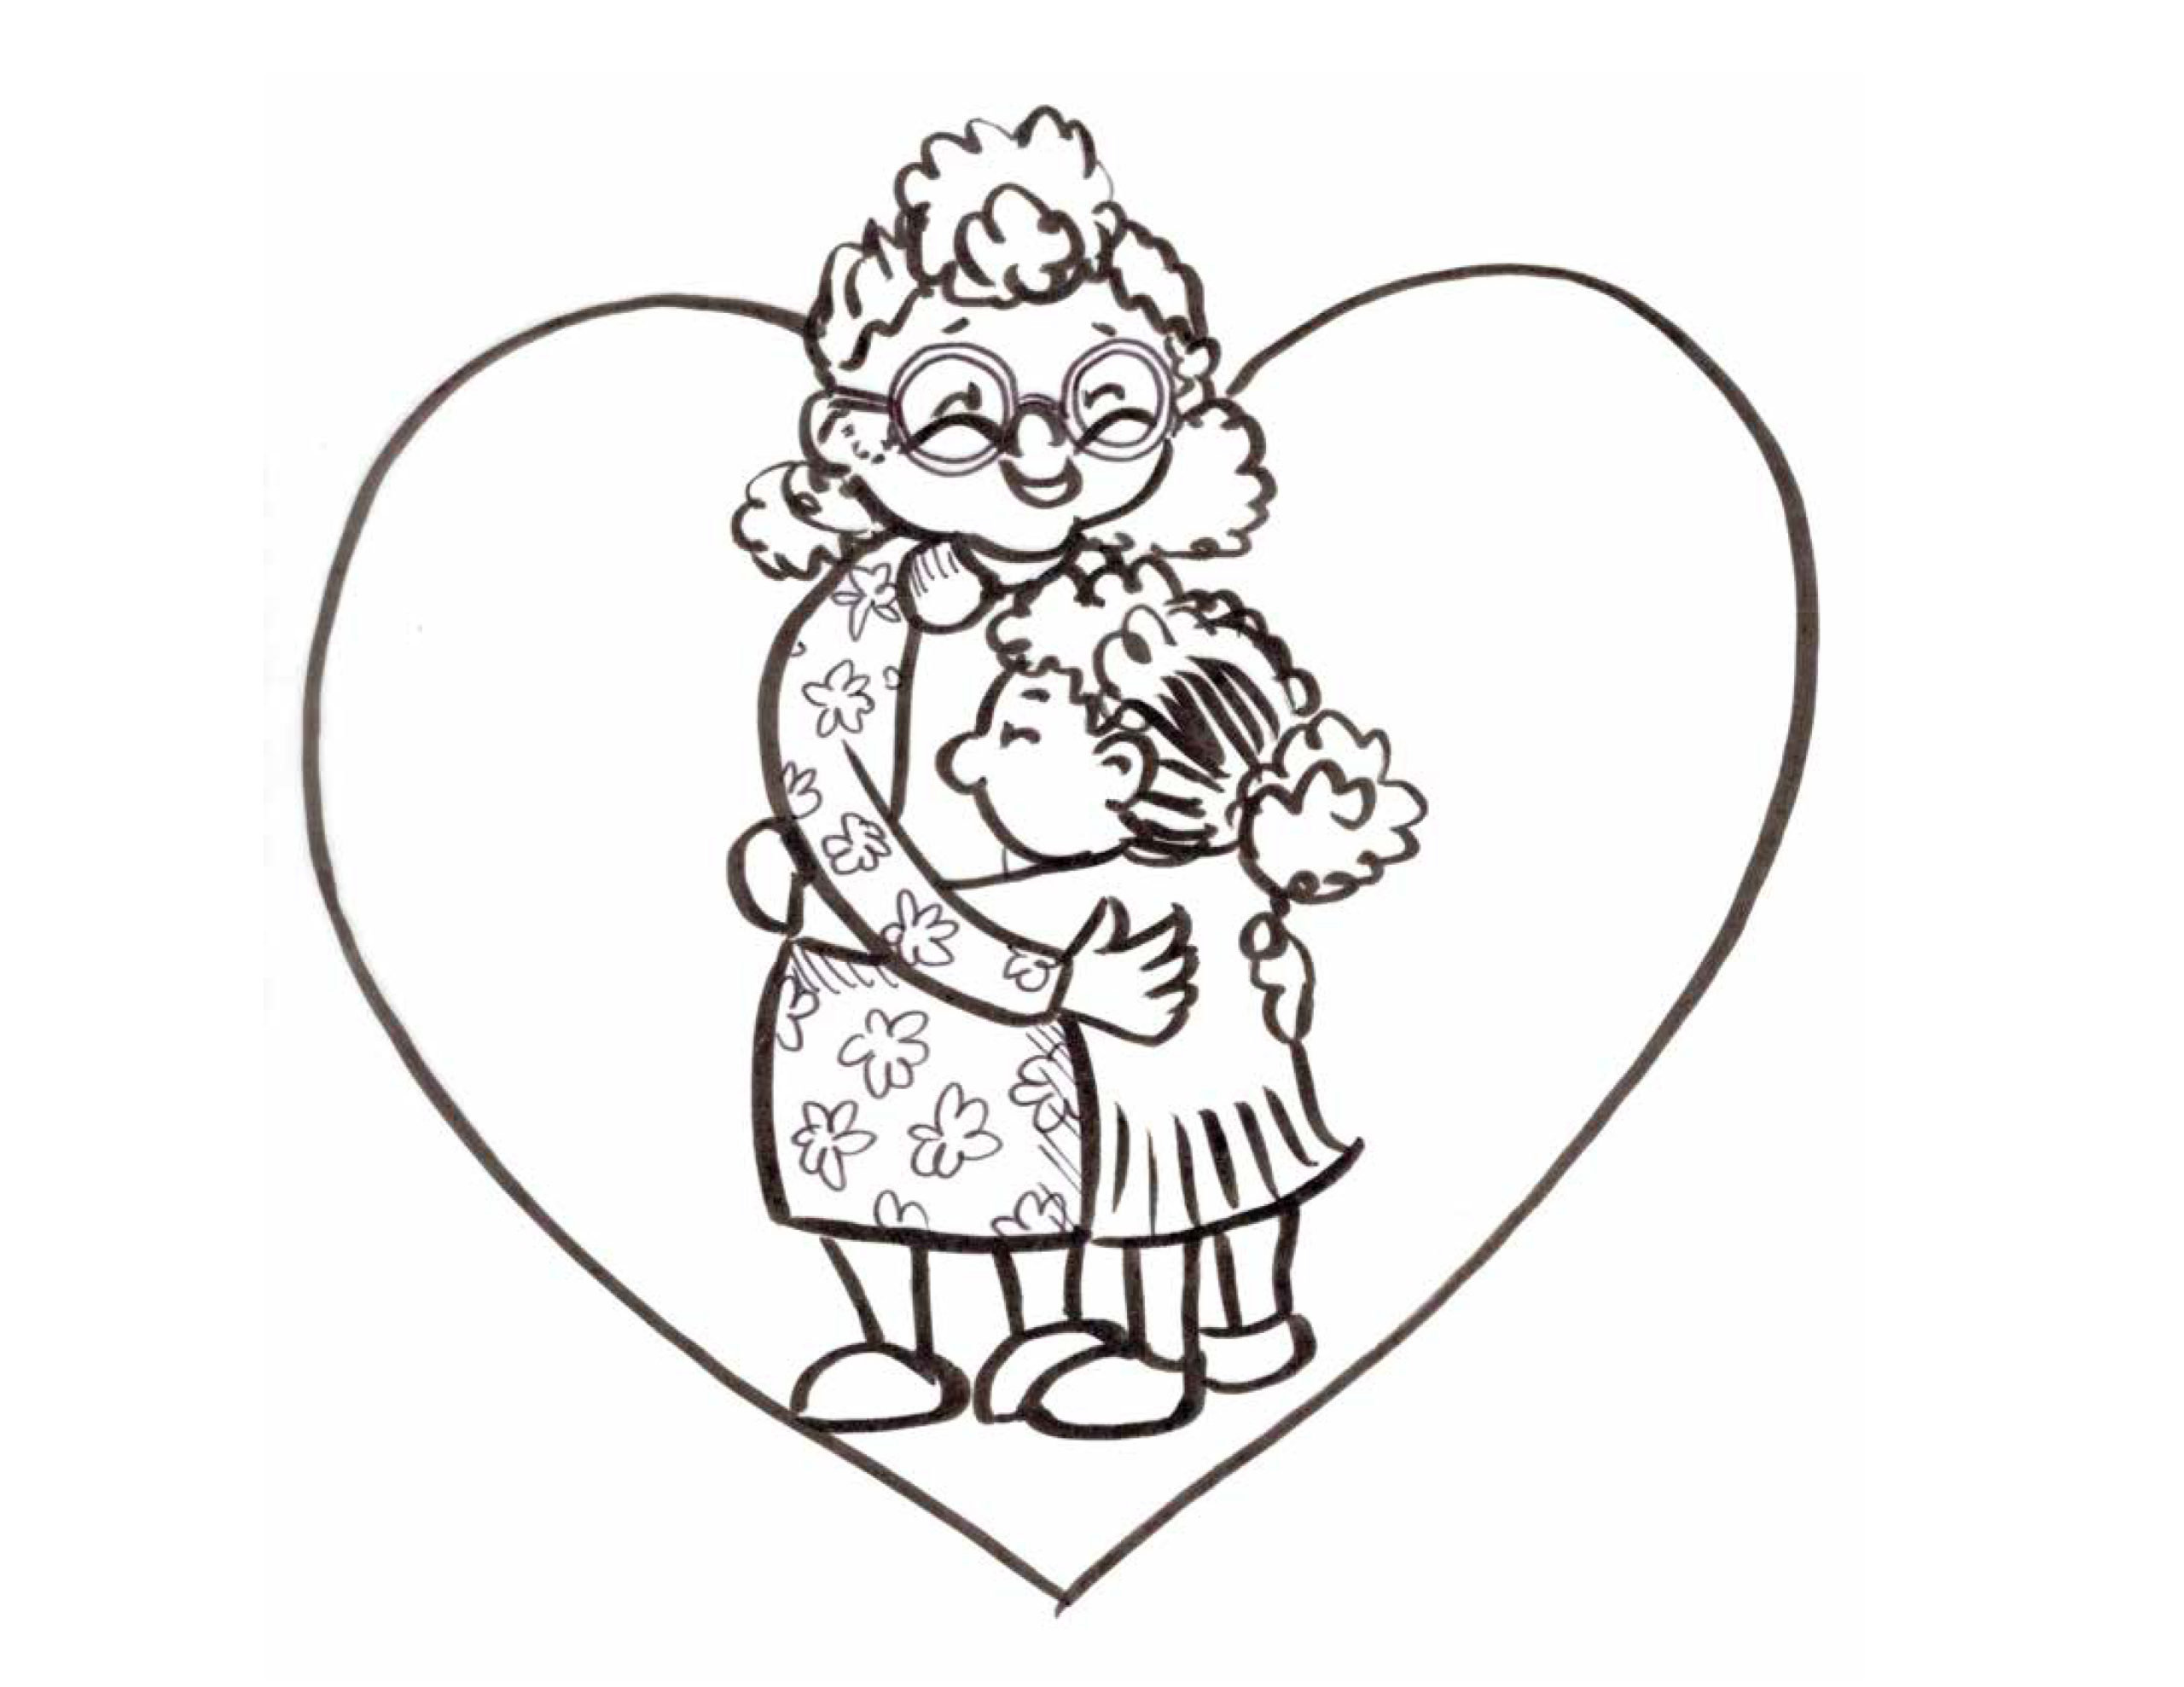 Girl hugging her grandmother in front of a heart background